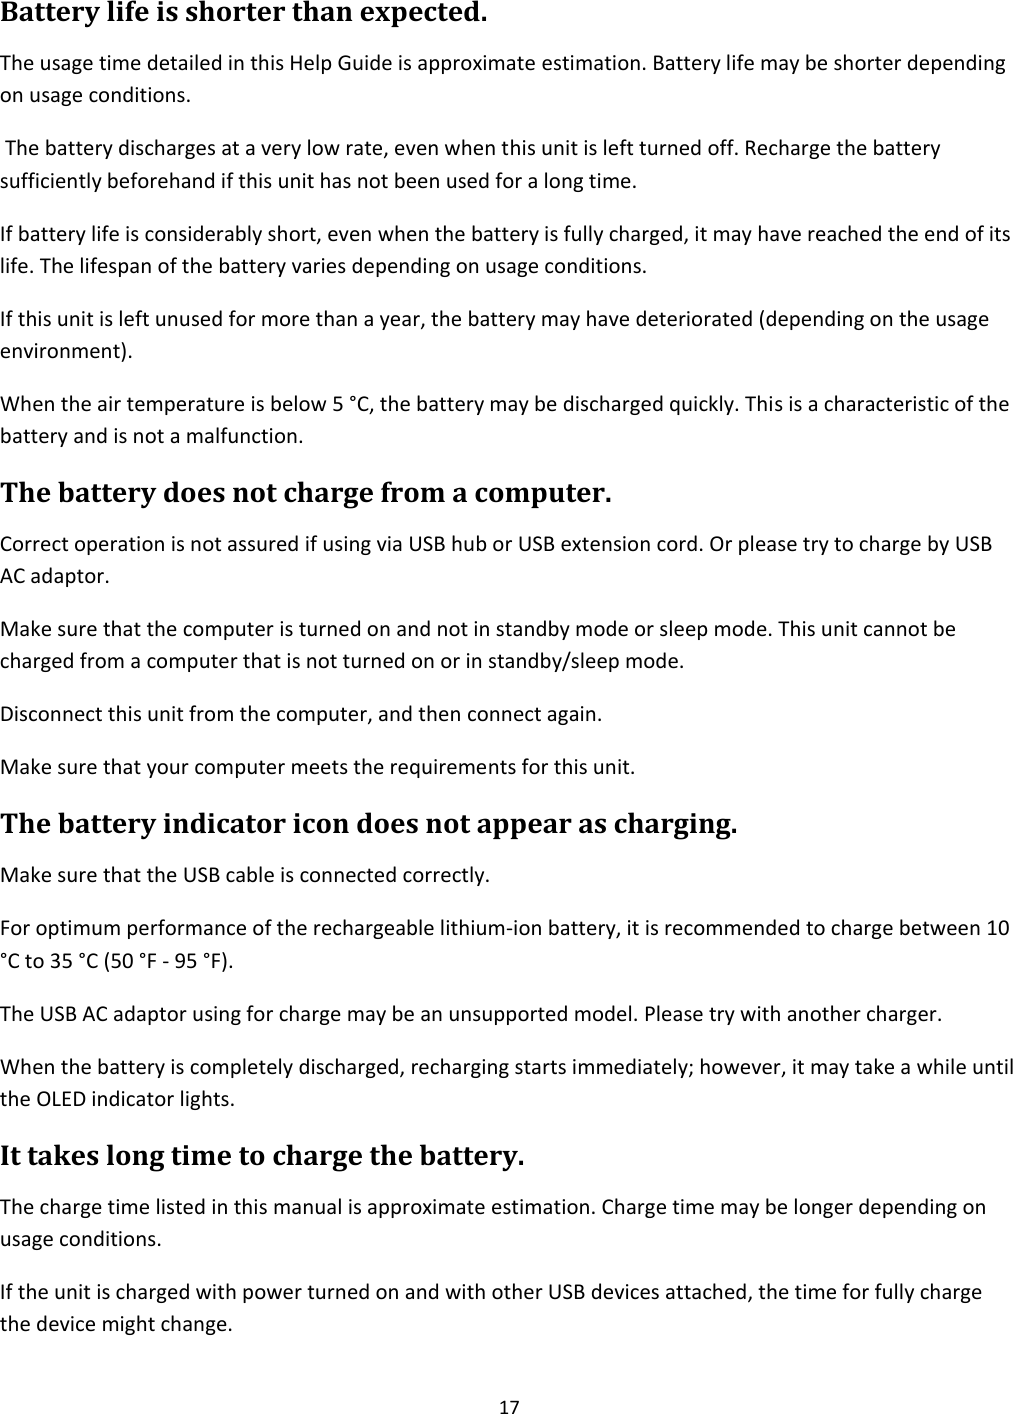 17  Battery life is shorter than expected. The usage time detailed in this Help Guide is approximate estimation. Battery life may be shorter depending on usage conditions.  The battery discharges at a very low rate, even when this unit is left turned off. Recharge the battery sufficiently beforehand if this unit has not been used for a long time. If battery life is considerably short, even when the battery is fully charged, it may have reached the end of its life. The lifespan of the battery varies depending on usage conditions. If this unit is left unused for more than a year, the battery may have deteriorated (depending on the usage environment). When the air temperature is below 5 °C, the battery may be discharged quickly. This is a characteristic of the battery and is not a malfunction. The battery does not charge from a computer. Correct operation is not assured if using via USB hub or USB extension cord. Or please try to charge by USB AC adaptor. Make sure that the computer is turned on and not in standby mode or sleep mode. This unit cannot be charged from a computer that is not turned on or in standby/sleep mode. Disconnect this unit from the computer, and then connect again. Make sure that your computer meets the requirements for this unit. The battery indicator icon does not appear as charging. Make sure that the USB cable is connected correctly. For optimum performance of the rechargeable lithium-ion battery, it is recommended to charge between 10 °C to 35 °C (50 °F - 95 °F). The USB AC adaptor using for charge may be an unsupported model. Please try with another charger. When the battery is completely discharged, recharging starts immediately; however, it may take a while until the OLED indicator lights. It takes long time to charge the battery. The charge time listed in this manual is approximate estimation. Charge time may be longer depending on usage conditions. If the unit is charged with power turned on and with other USB devices attached, the time for fully charge the device might change. 